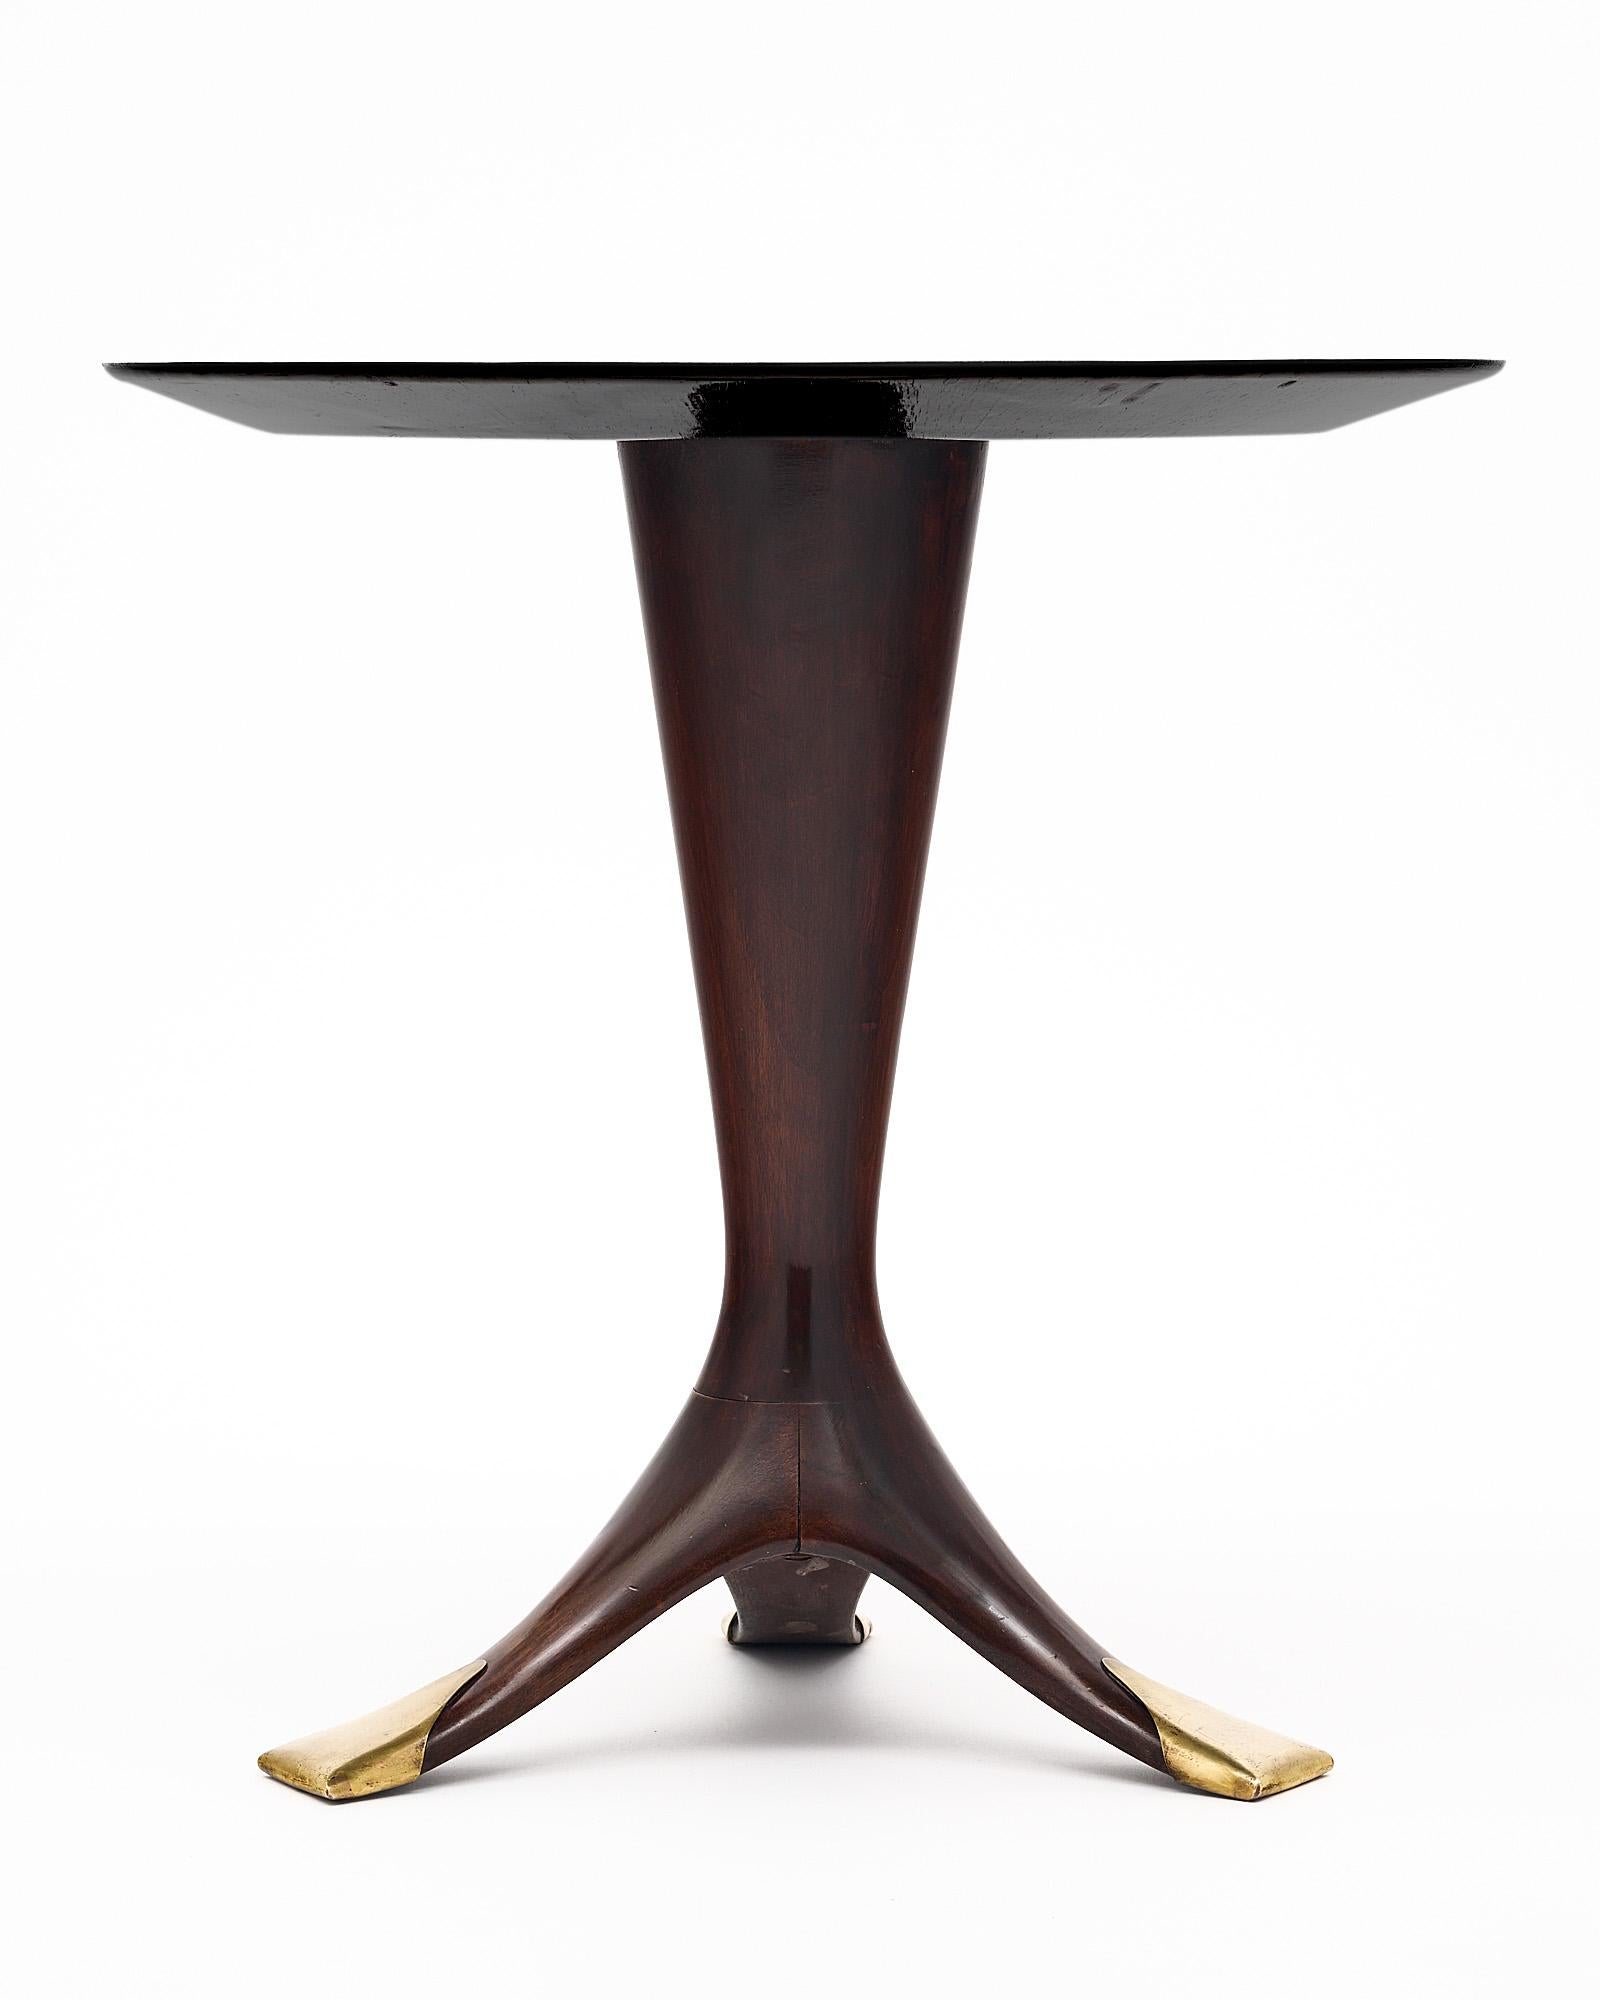 Mid-20th Century French Vintage Art Deco Period Table